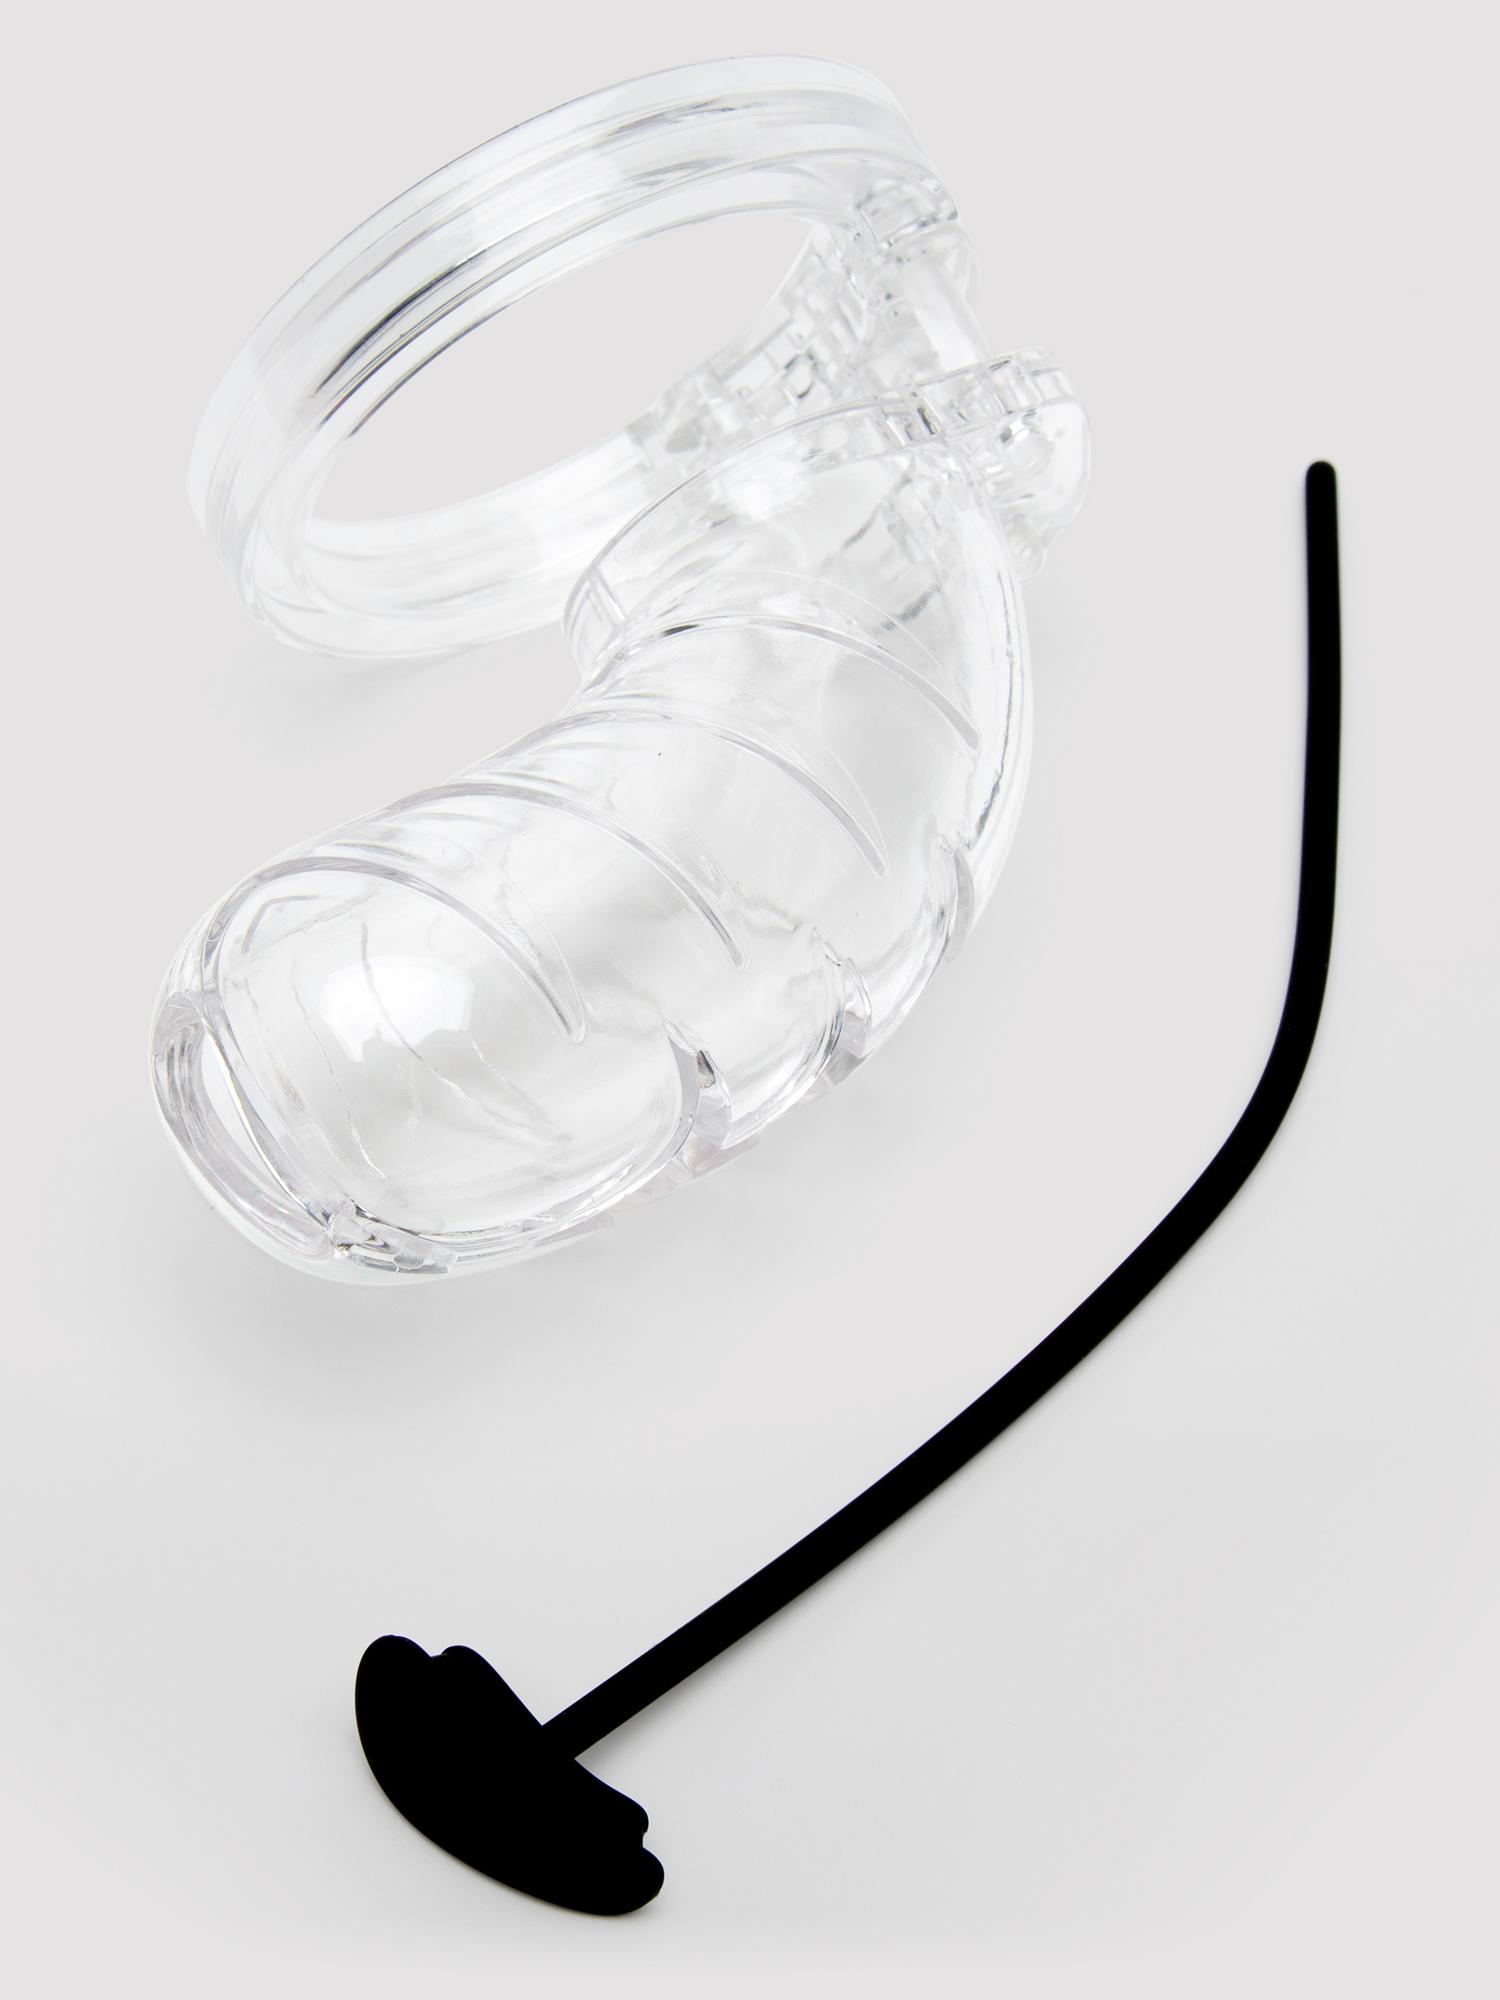 Man Cage Chastity Cage with Urethral Sound. Slide 3